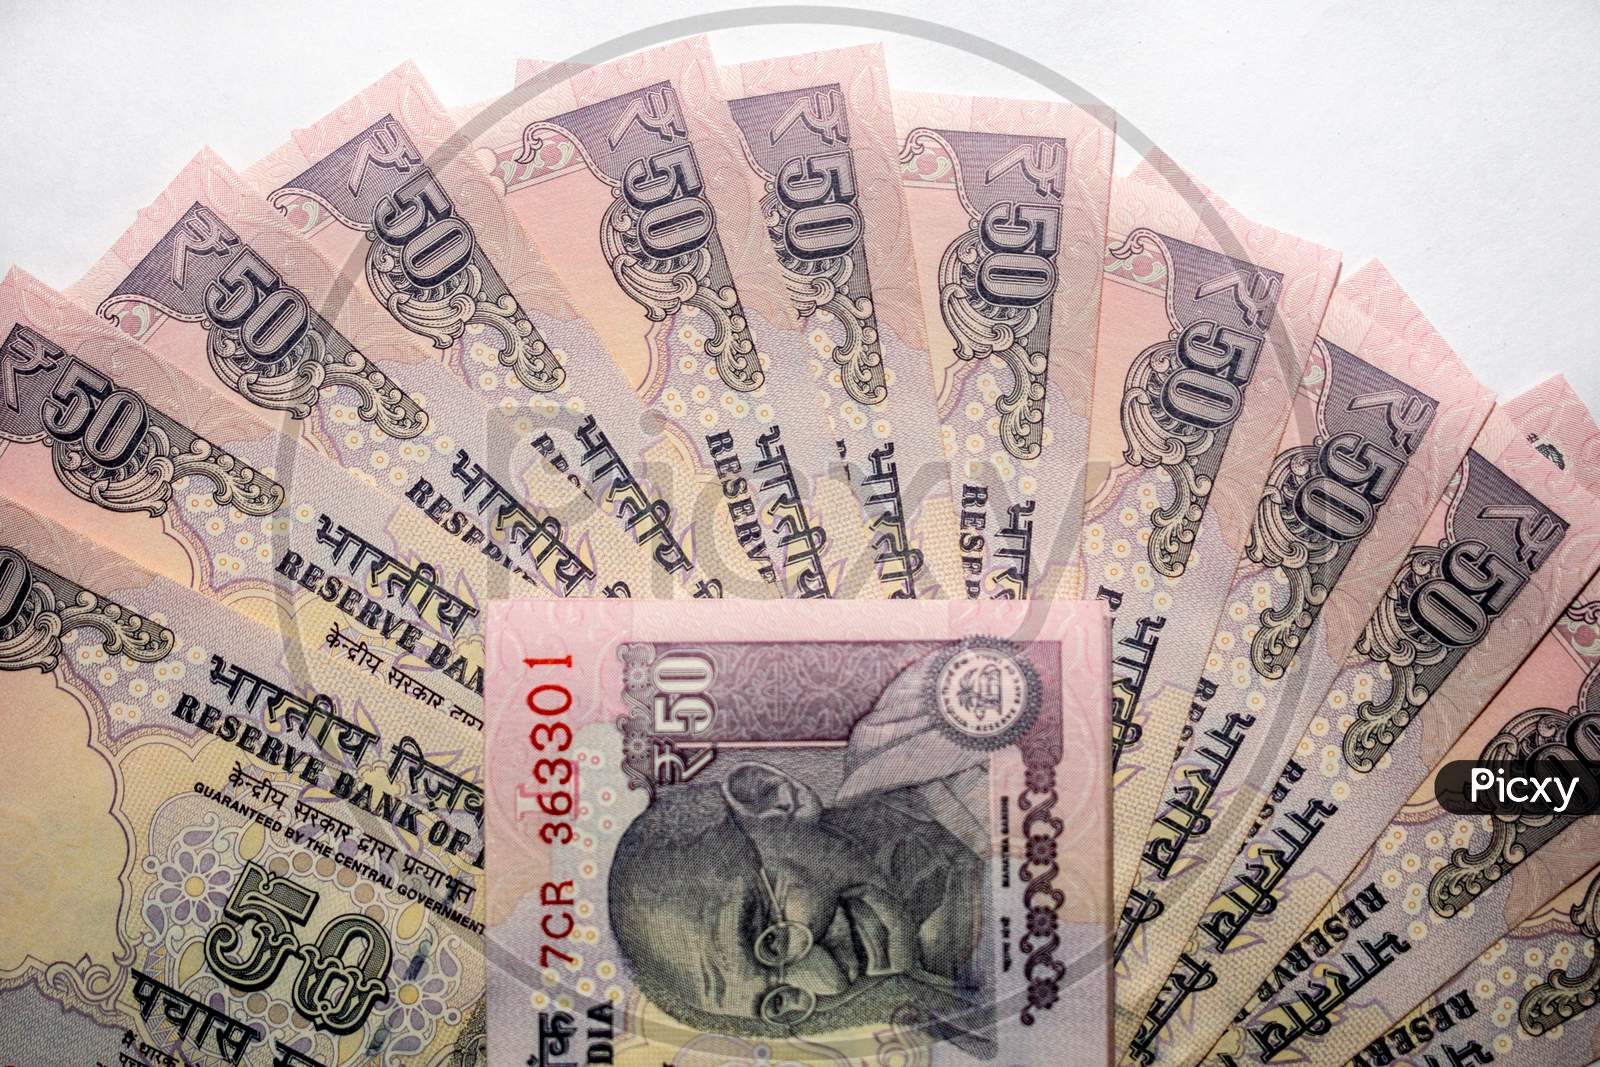 A bundle of 50 rupees notes put on the Indian currency 50 rupees notes on a white background